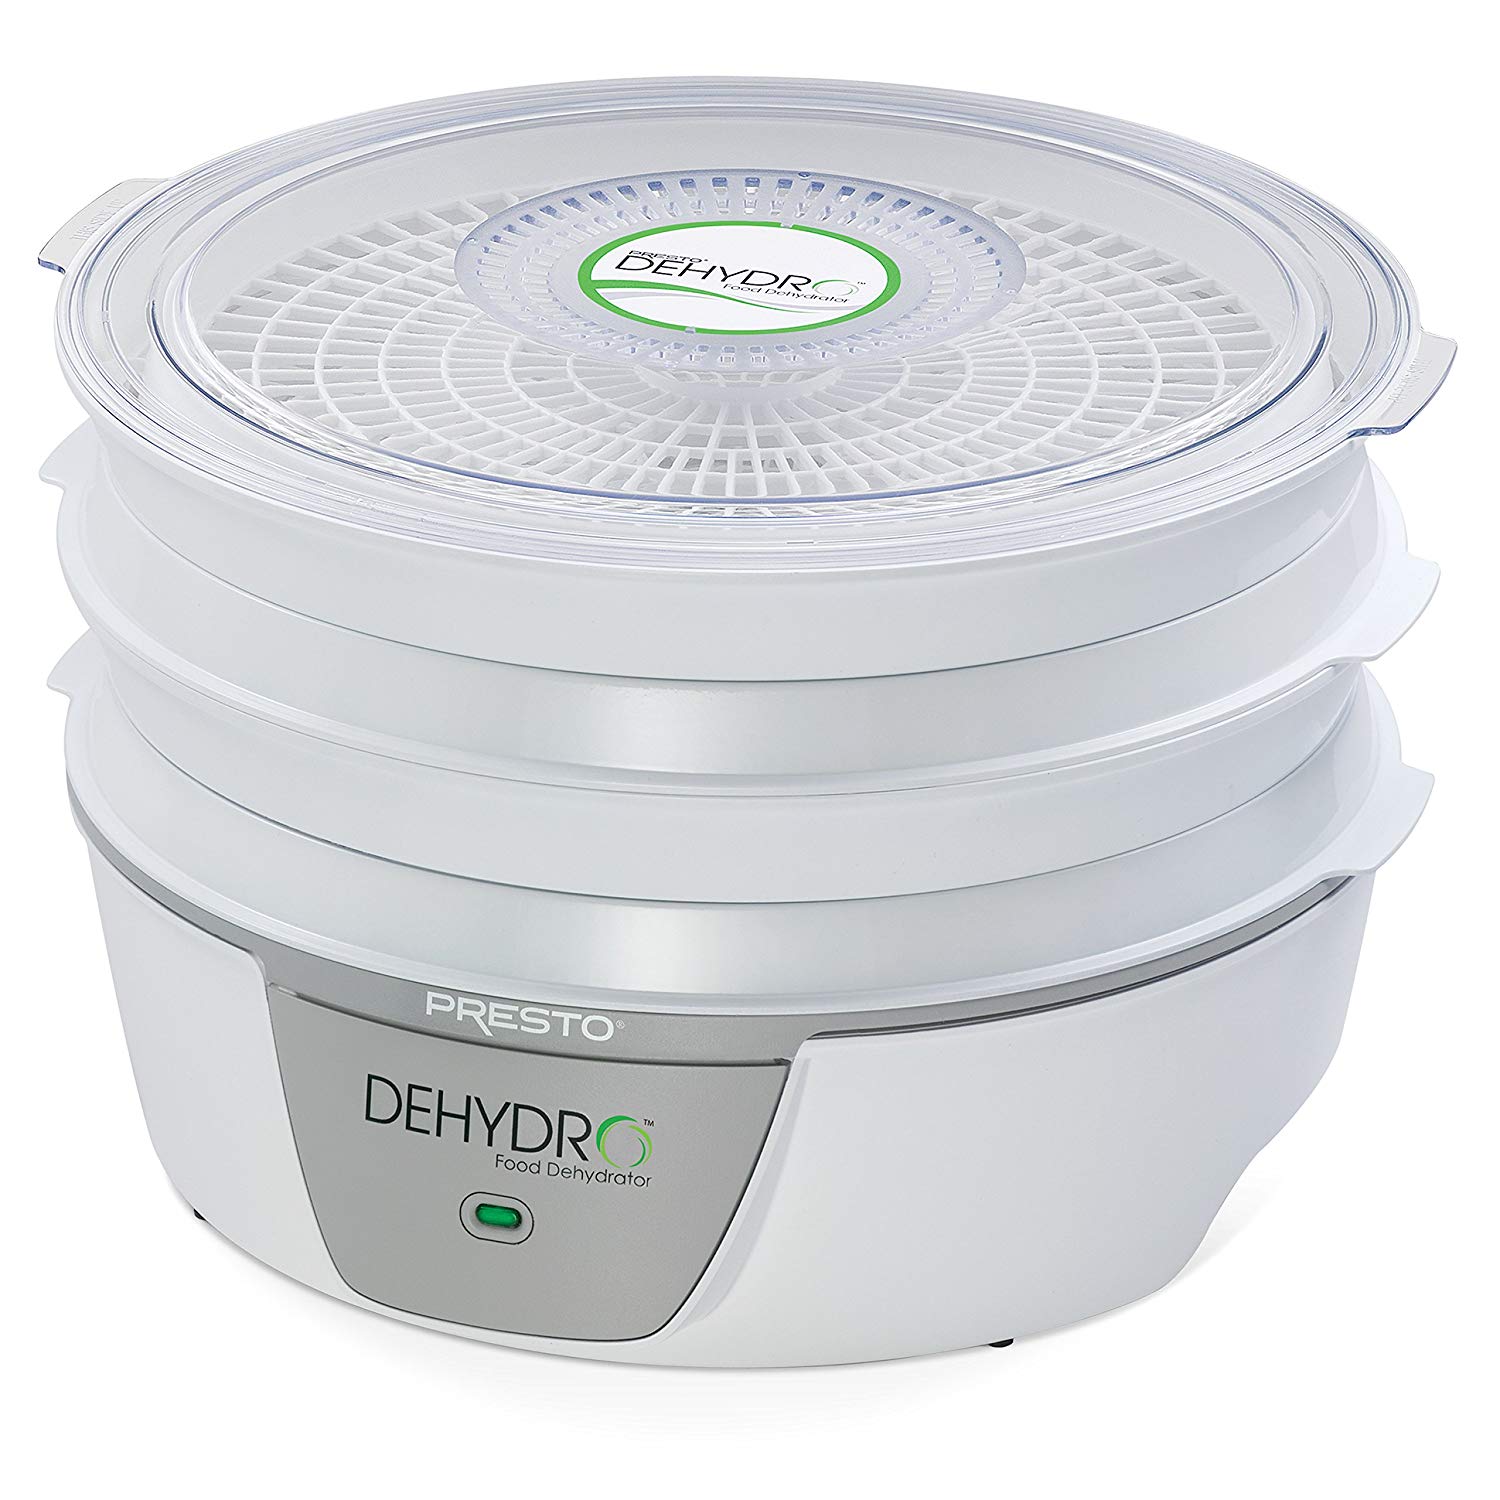 You are currently viewing Presto Dehydro Electric Food Dehydrator 06300